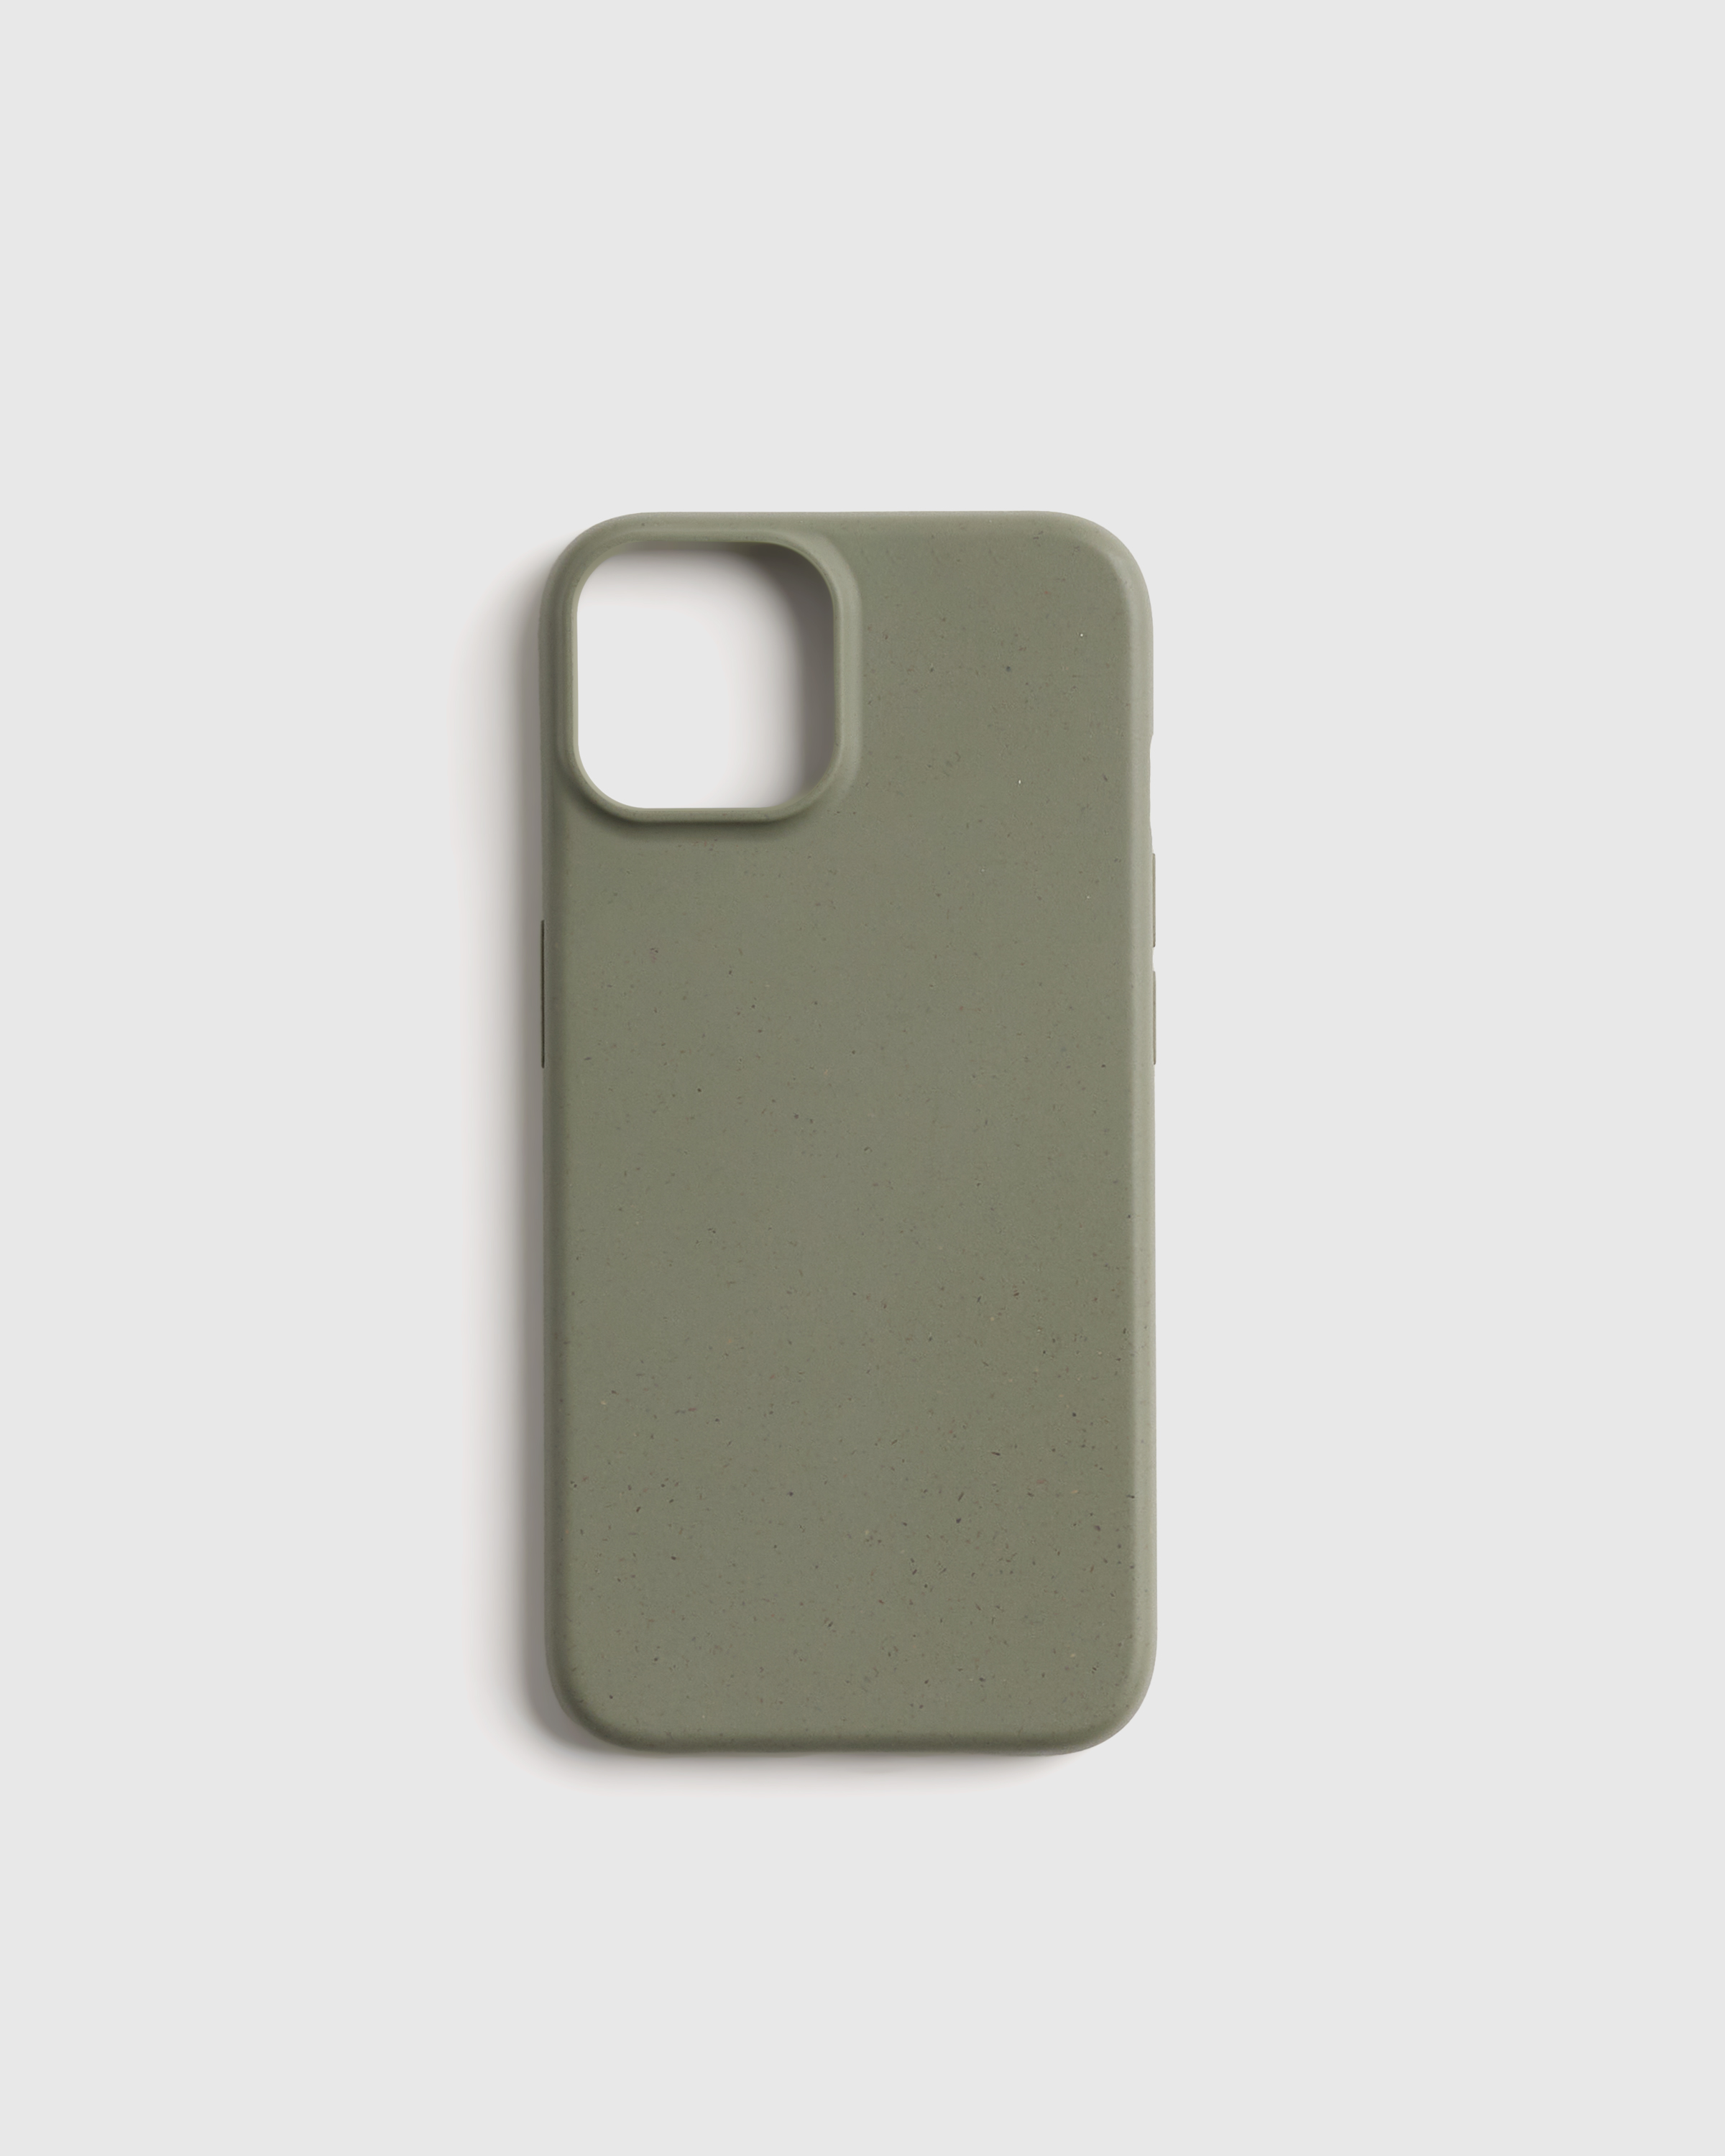 Quince Biodegradable Iphone Case In Olive